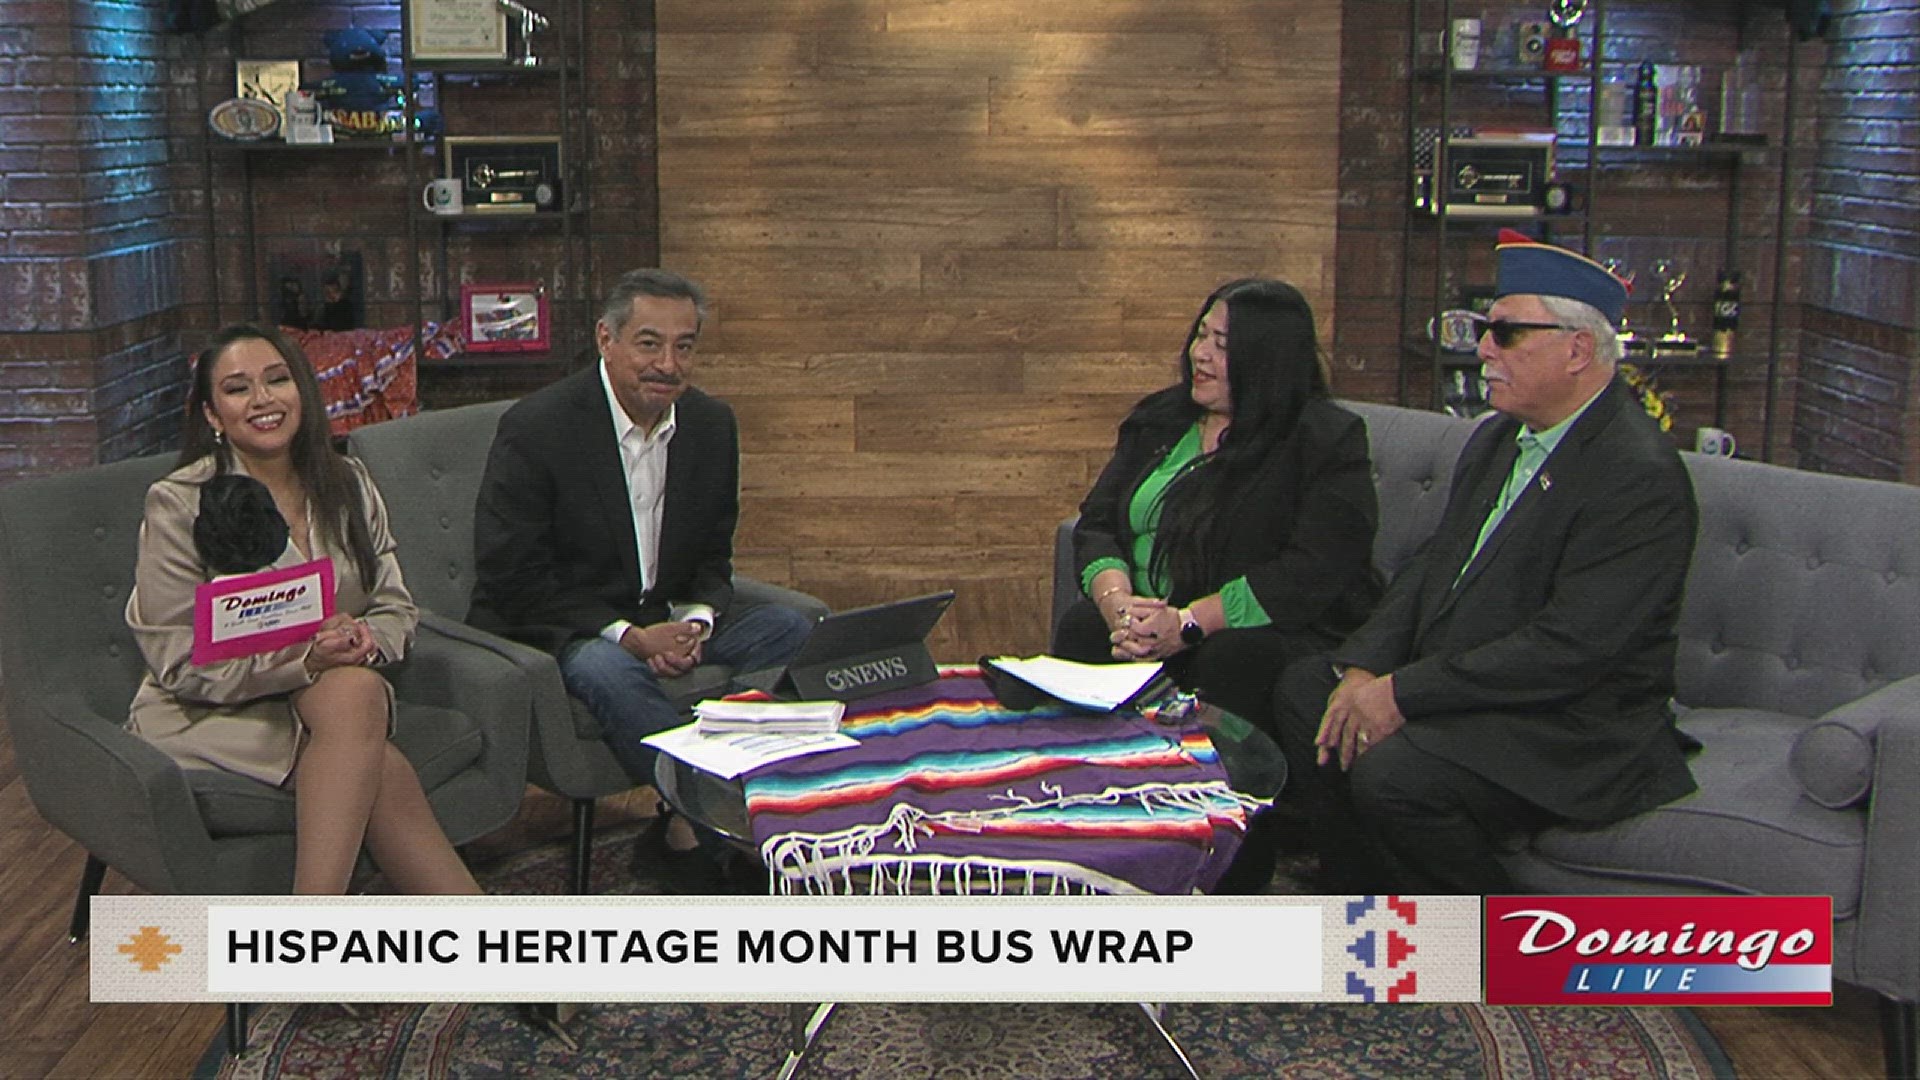 The Robstown Women's Chapter of the American GI Forum's Patsy Vasquez-Contes joined us to invite folks to their Hispanic Heritage Month Bus Wrap unveiling event.